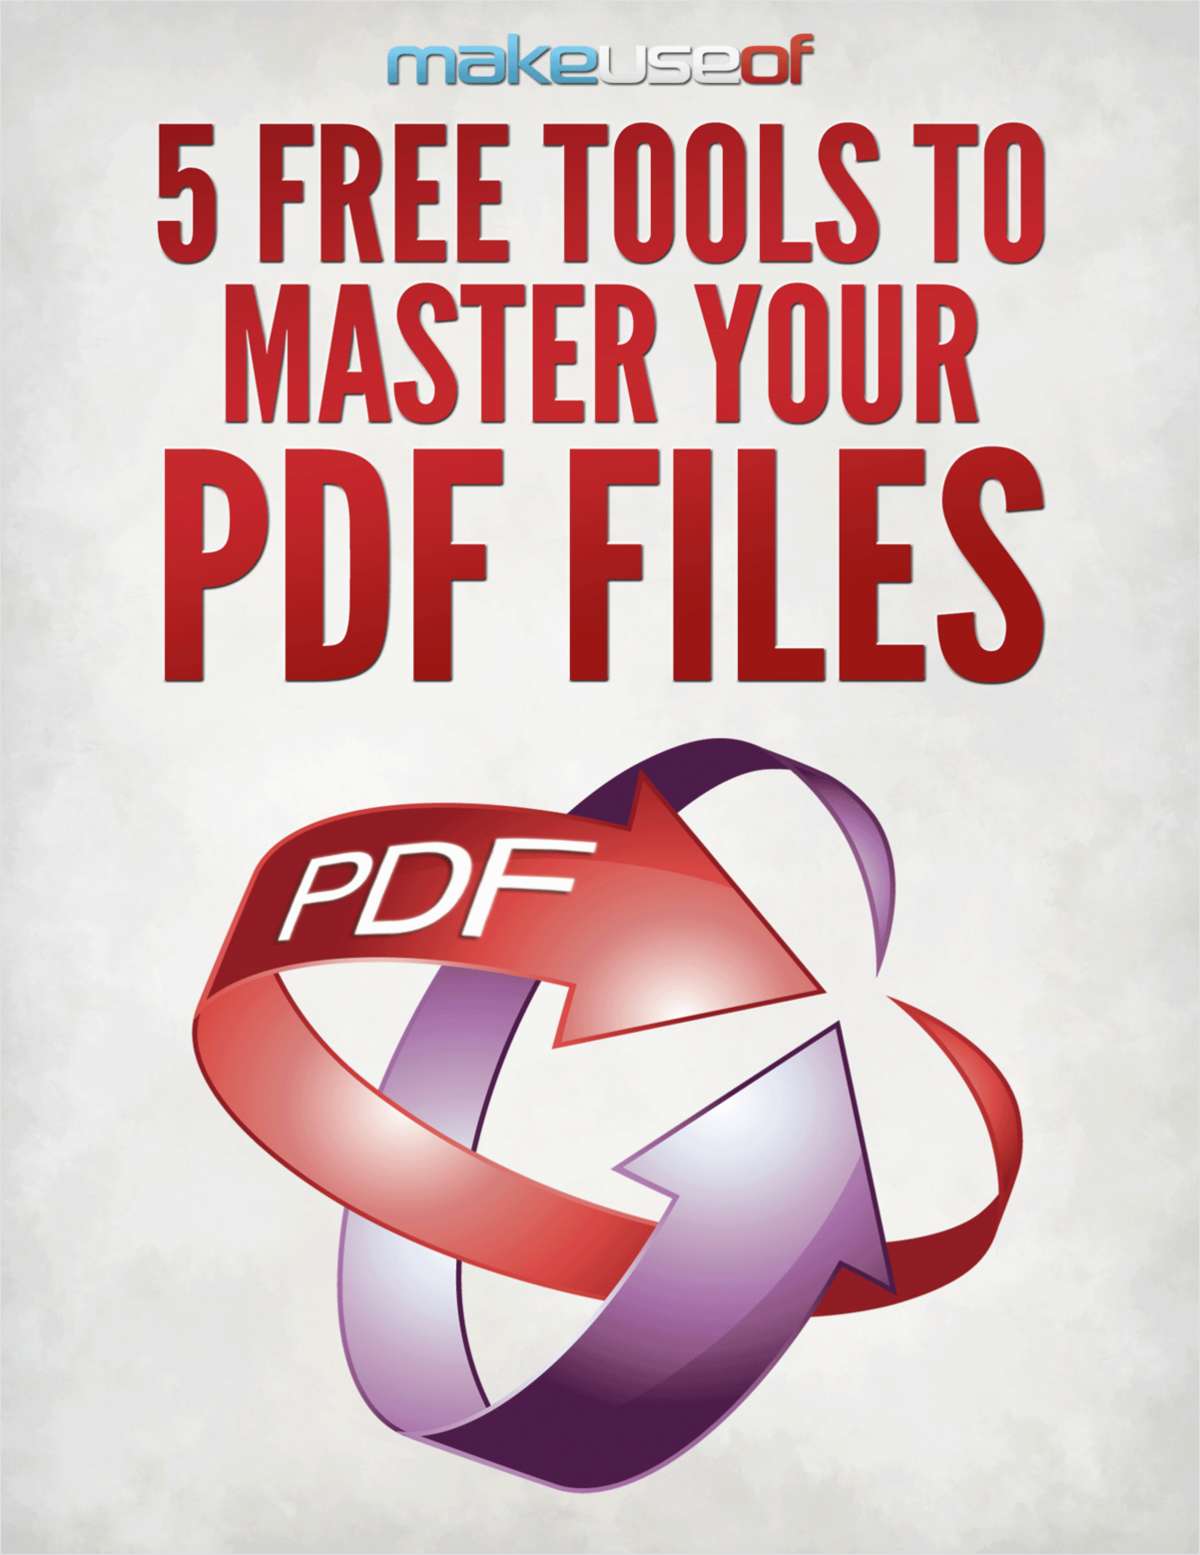 5 Free Tools to Master Your PDF Files